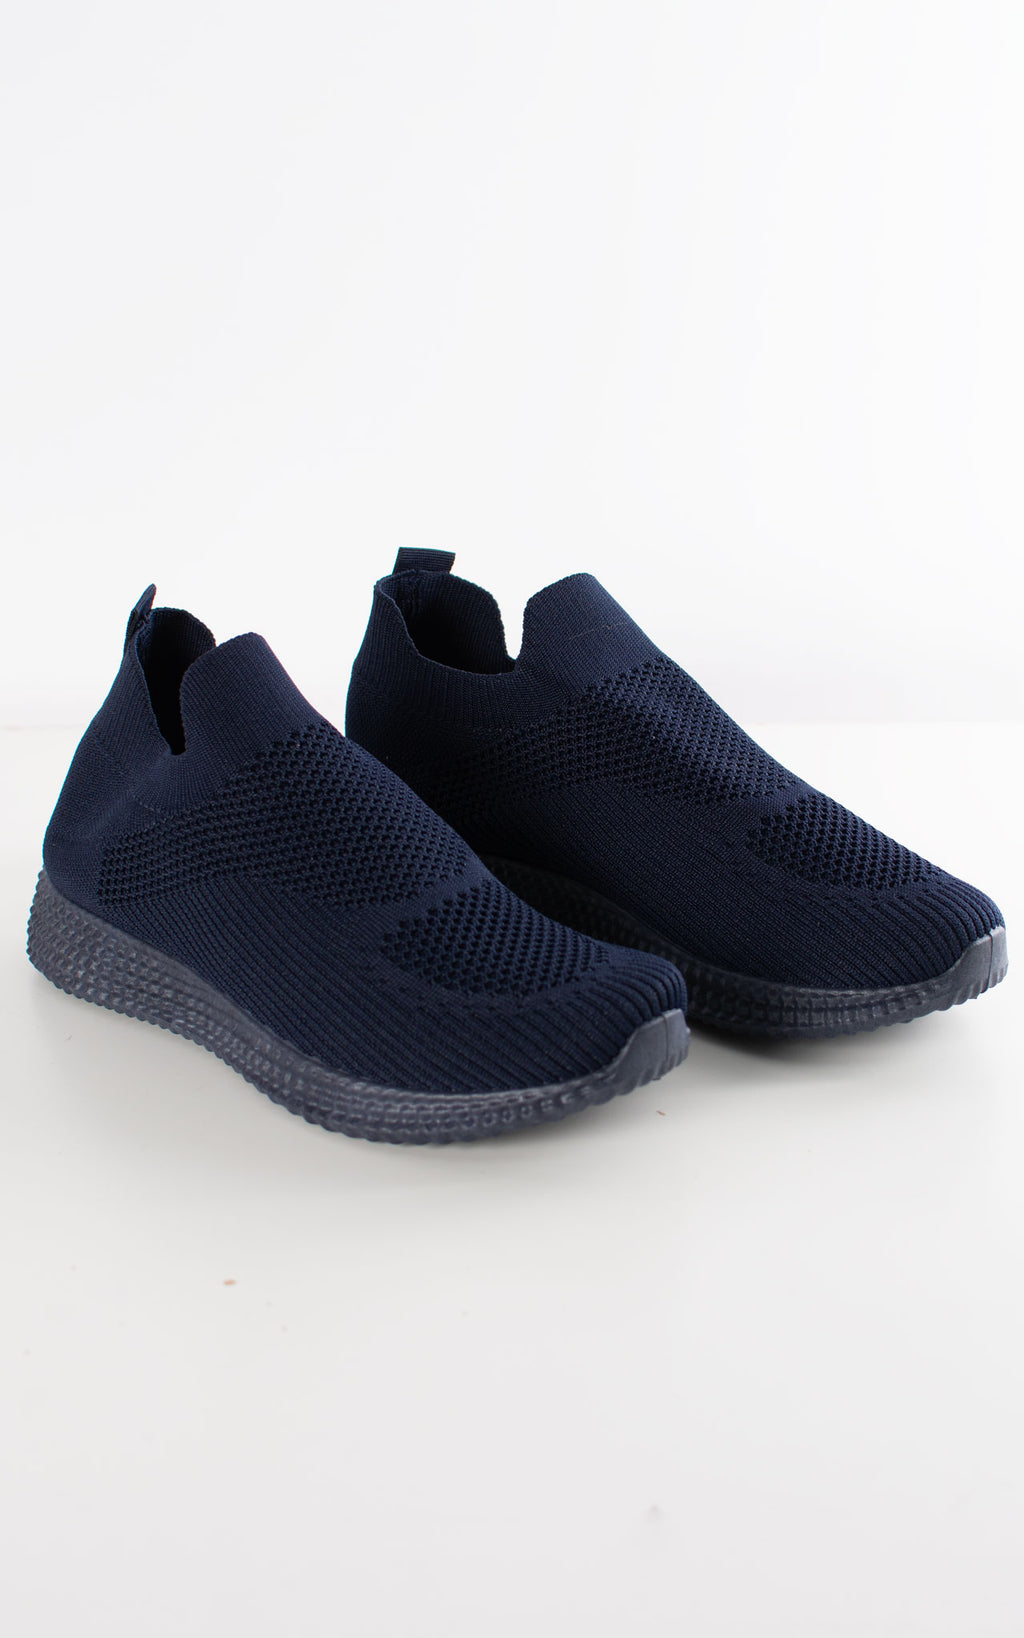 Jay Trainers | Slip On | Navy